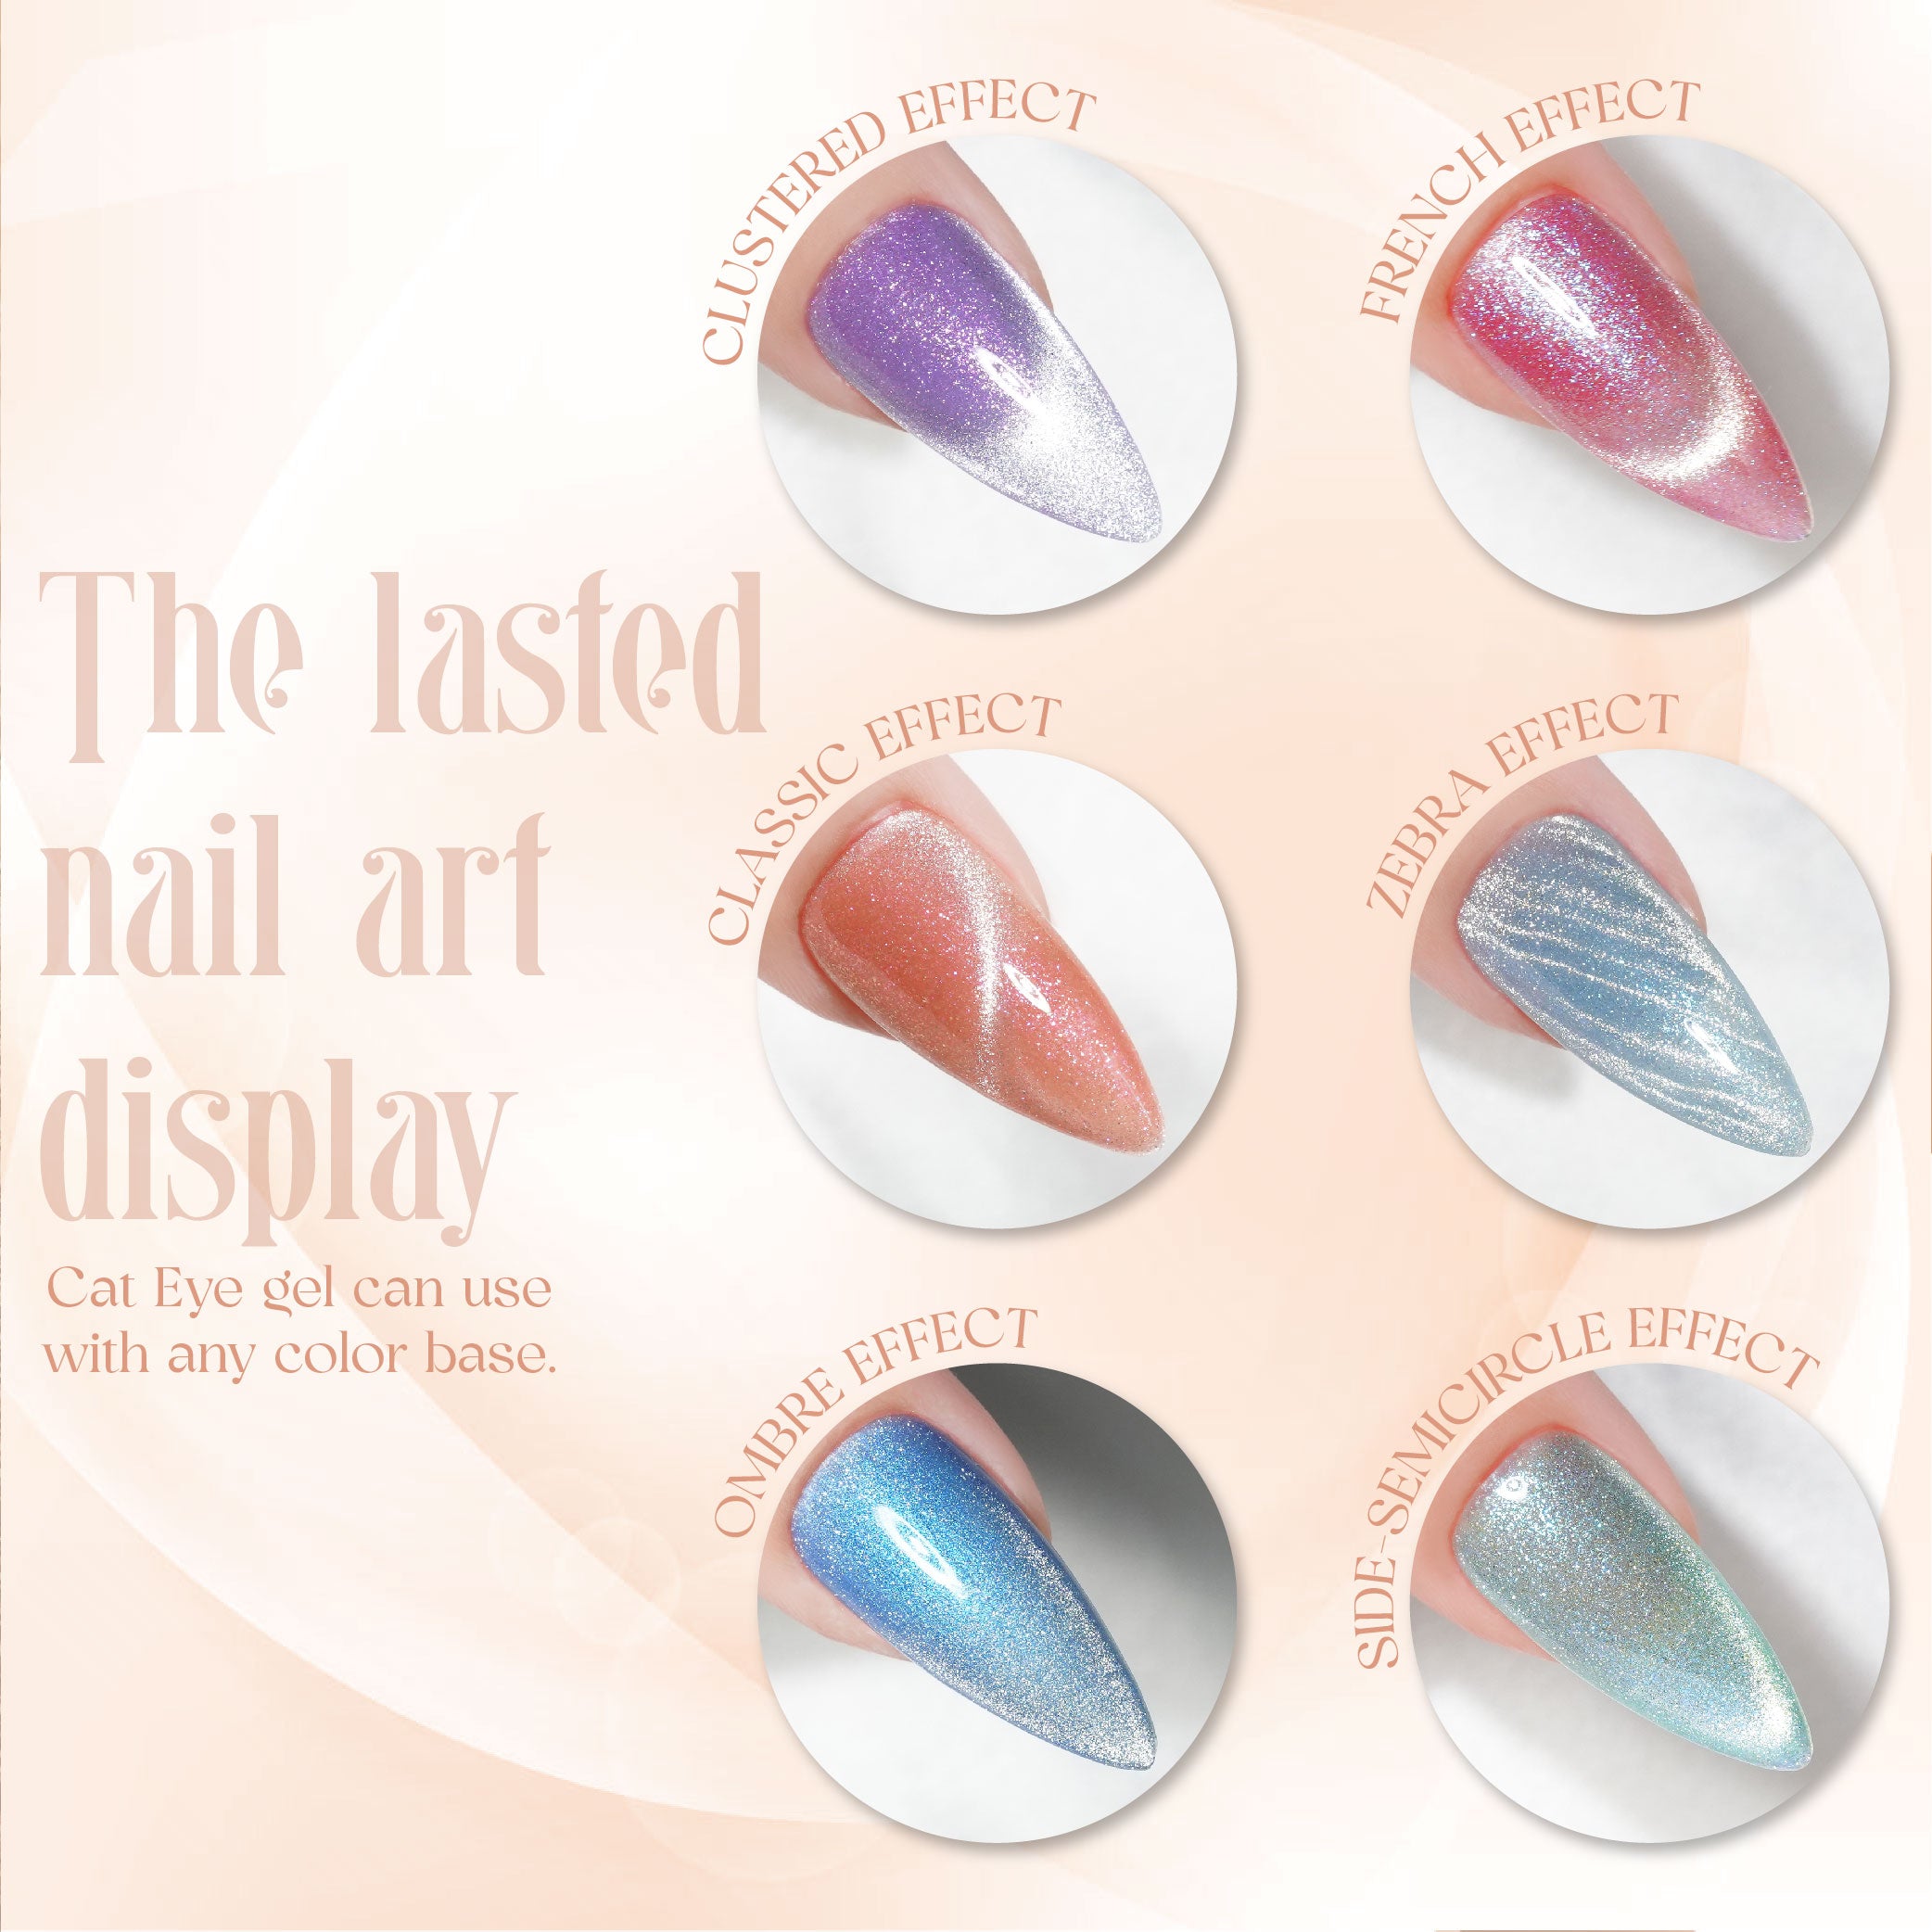 LAVIS Cat Eyes CE11 - 08 - Gel Polish 0.5 oz - Enchanted Spell Collection